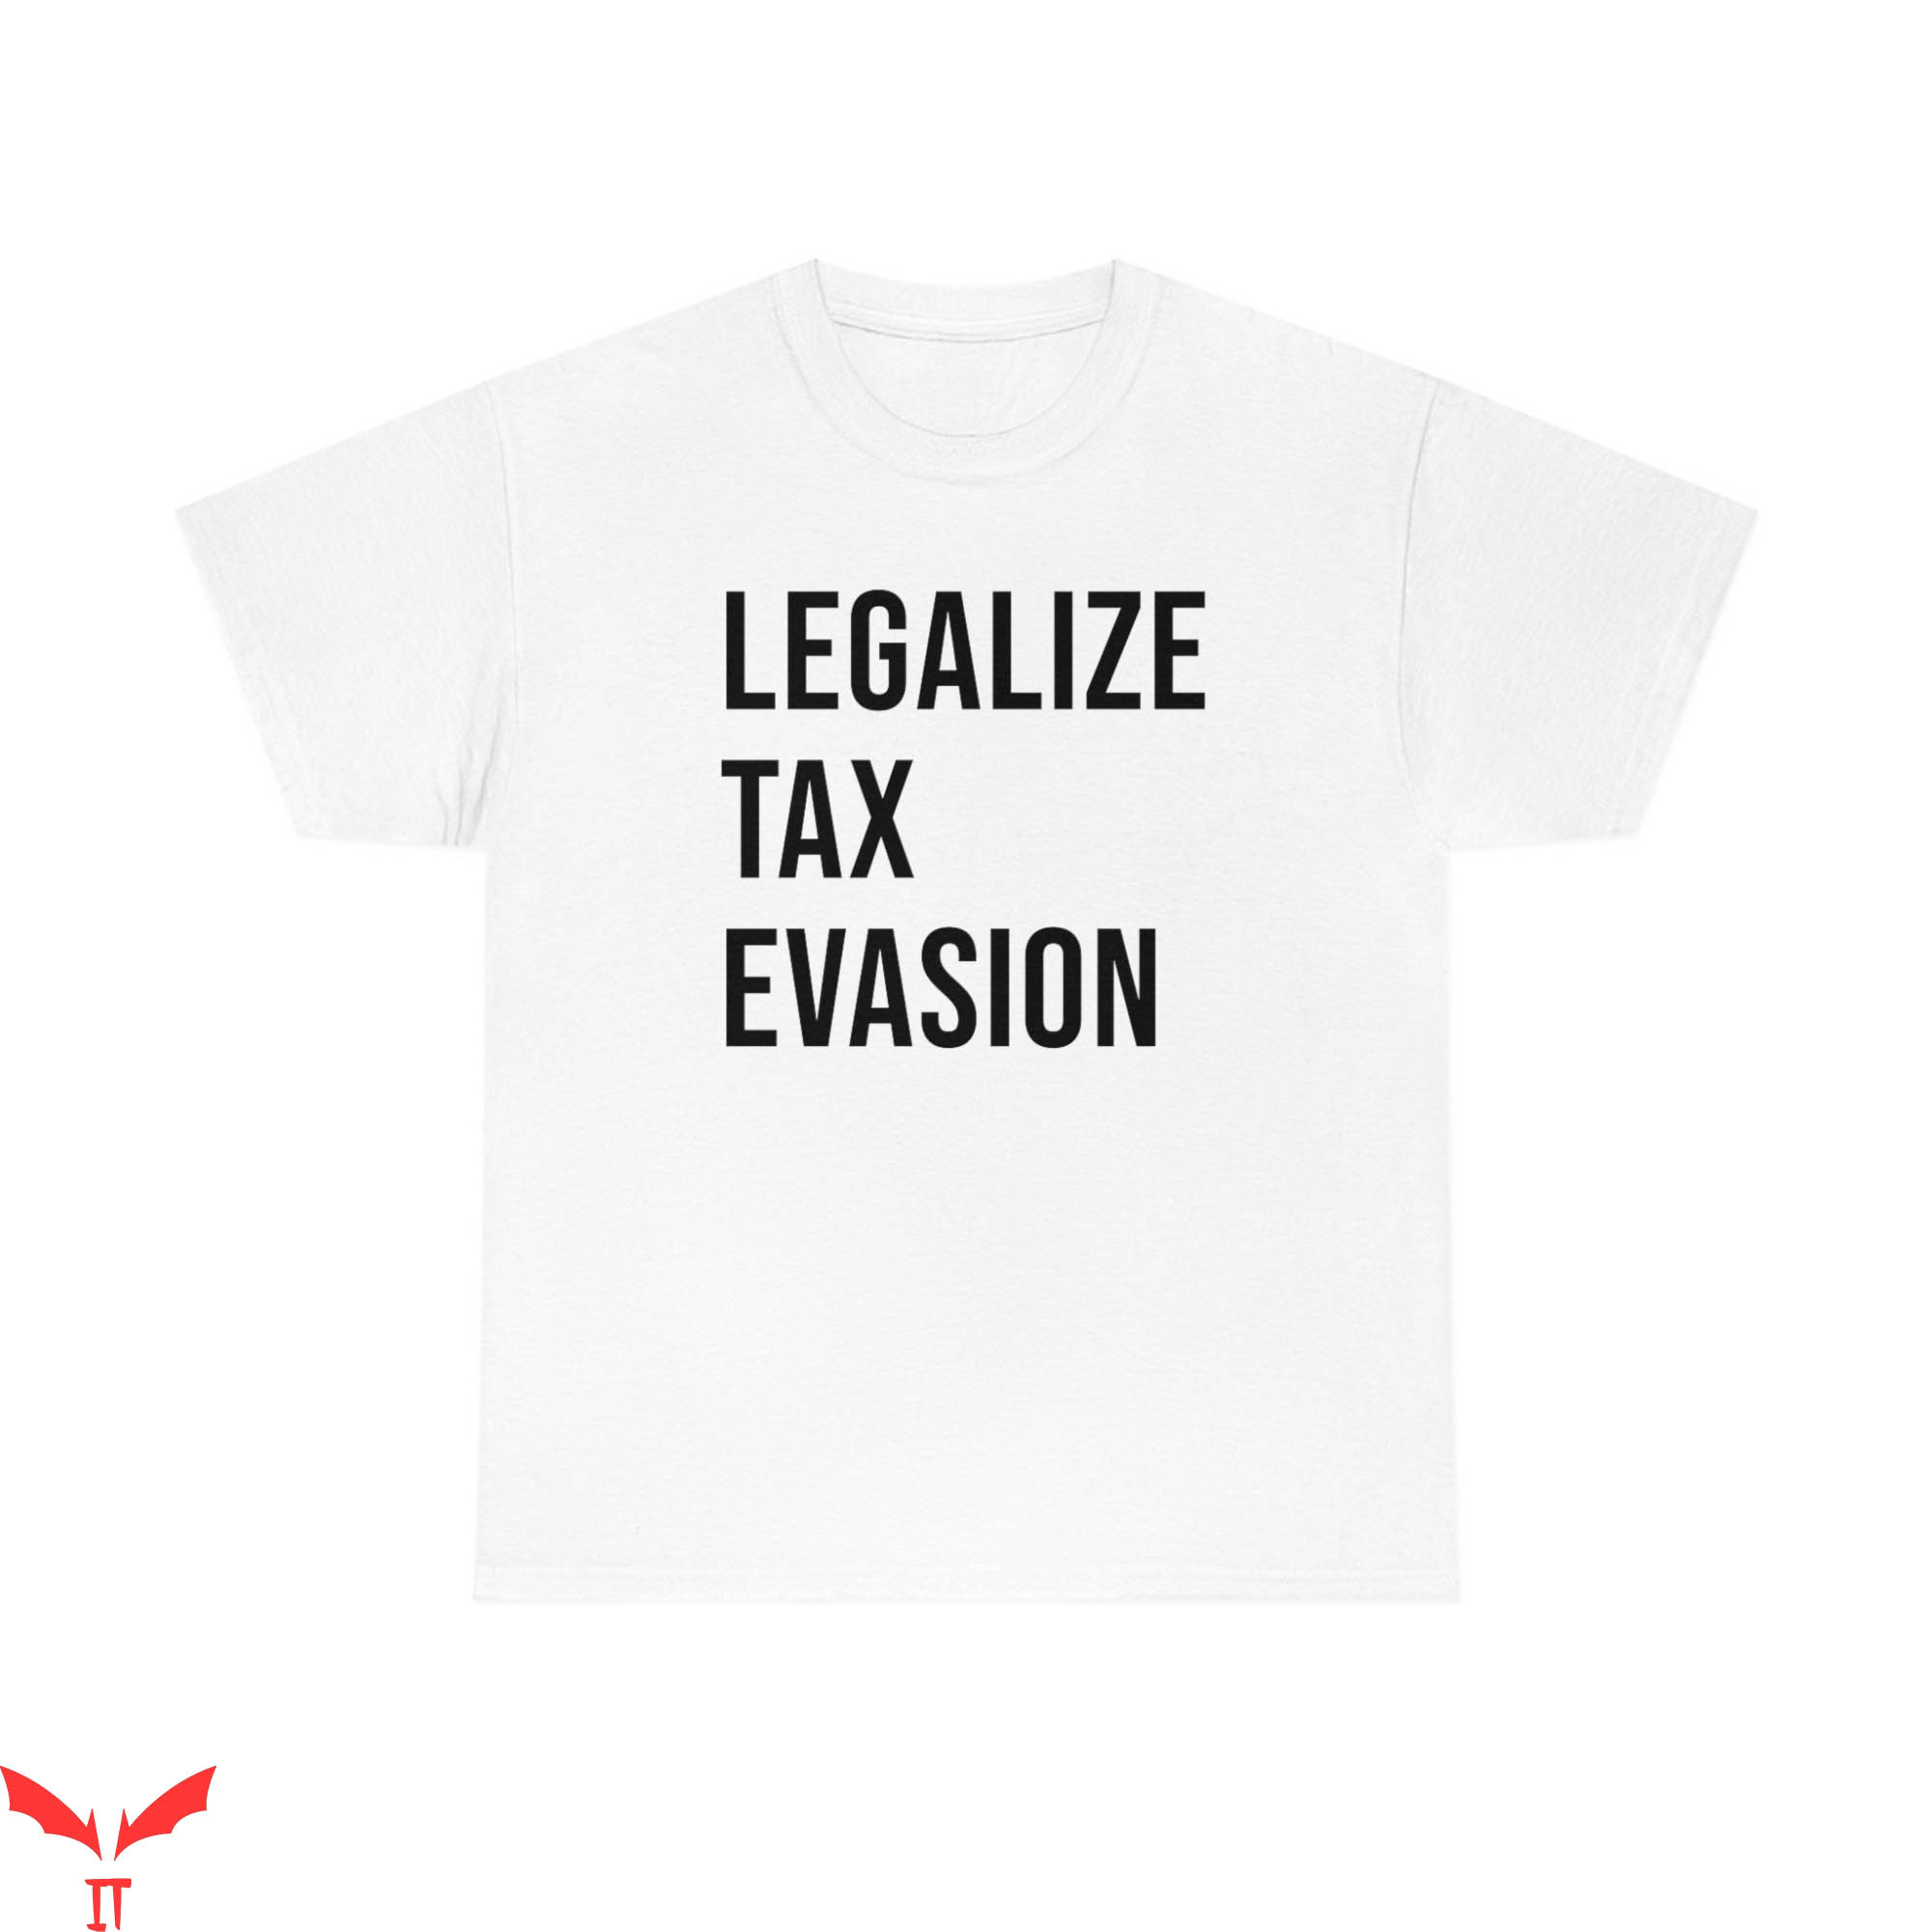 Tax Evasion T-Shirt Legalize Funny Trendy Meme Funny Style